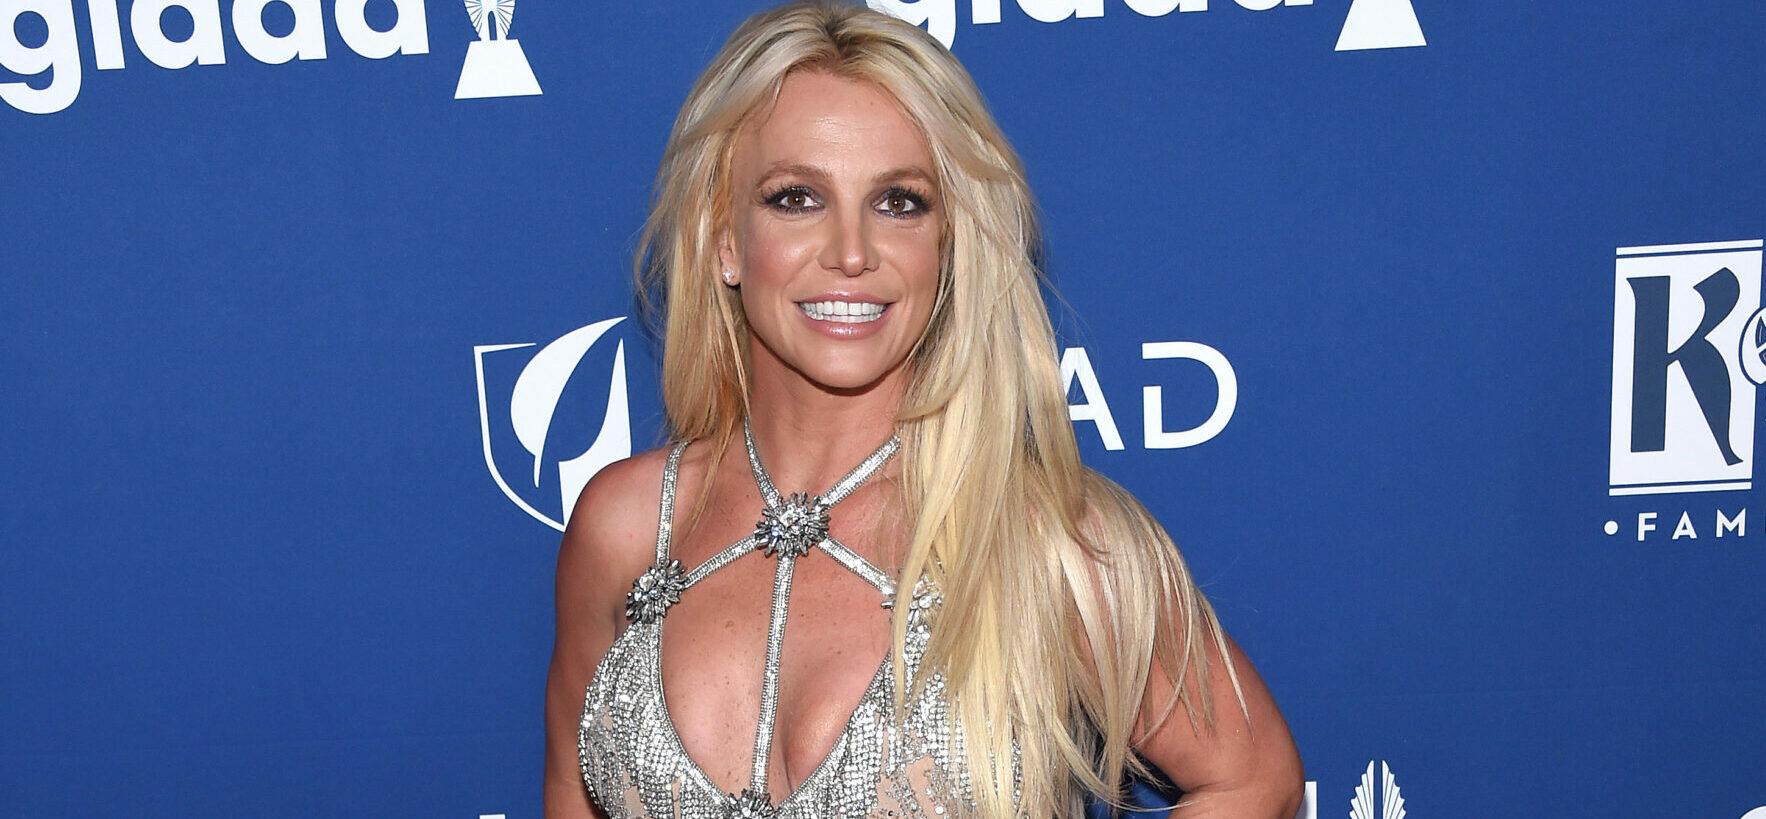 Was Britney Spears Banned From The Four Seasons Hotel After Topless Swim?